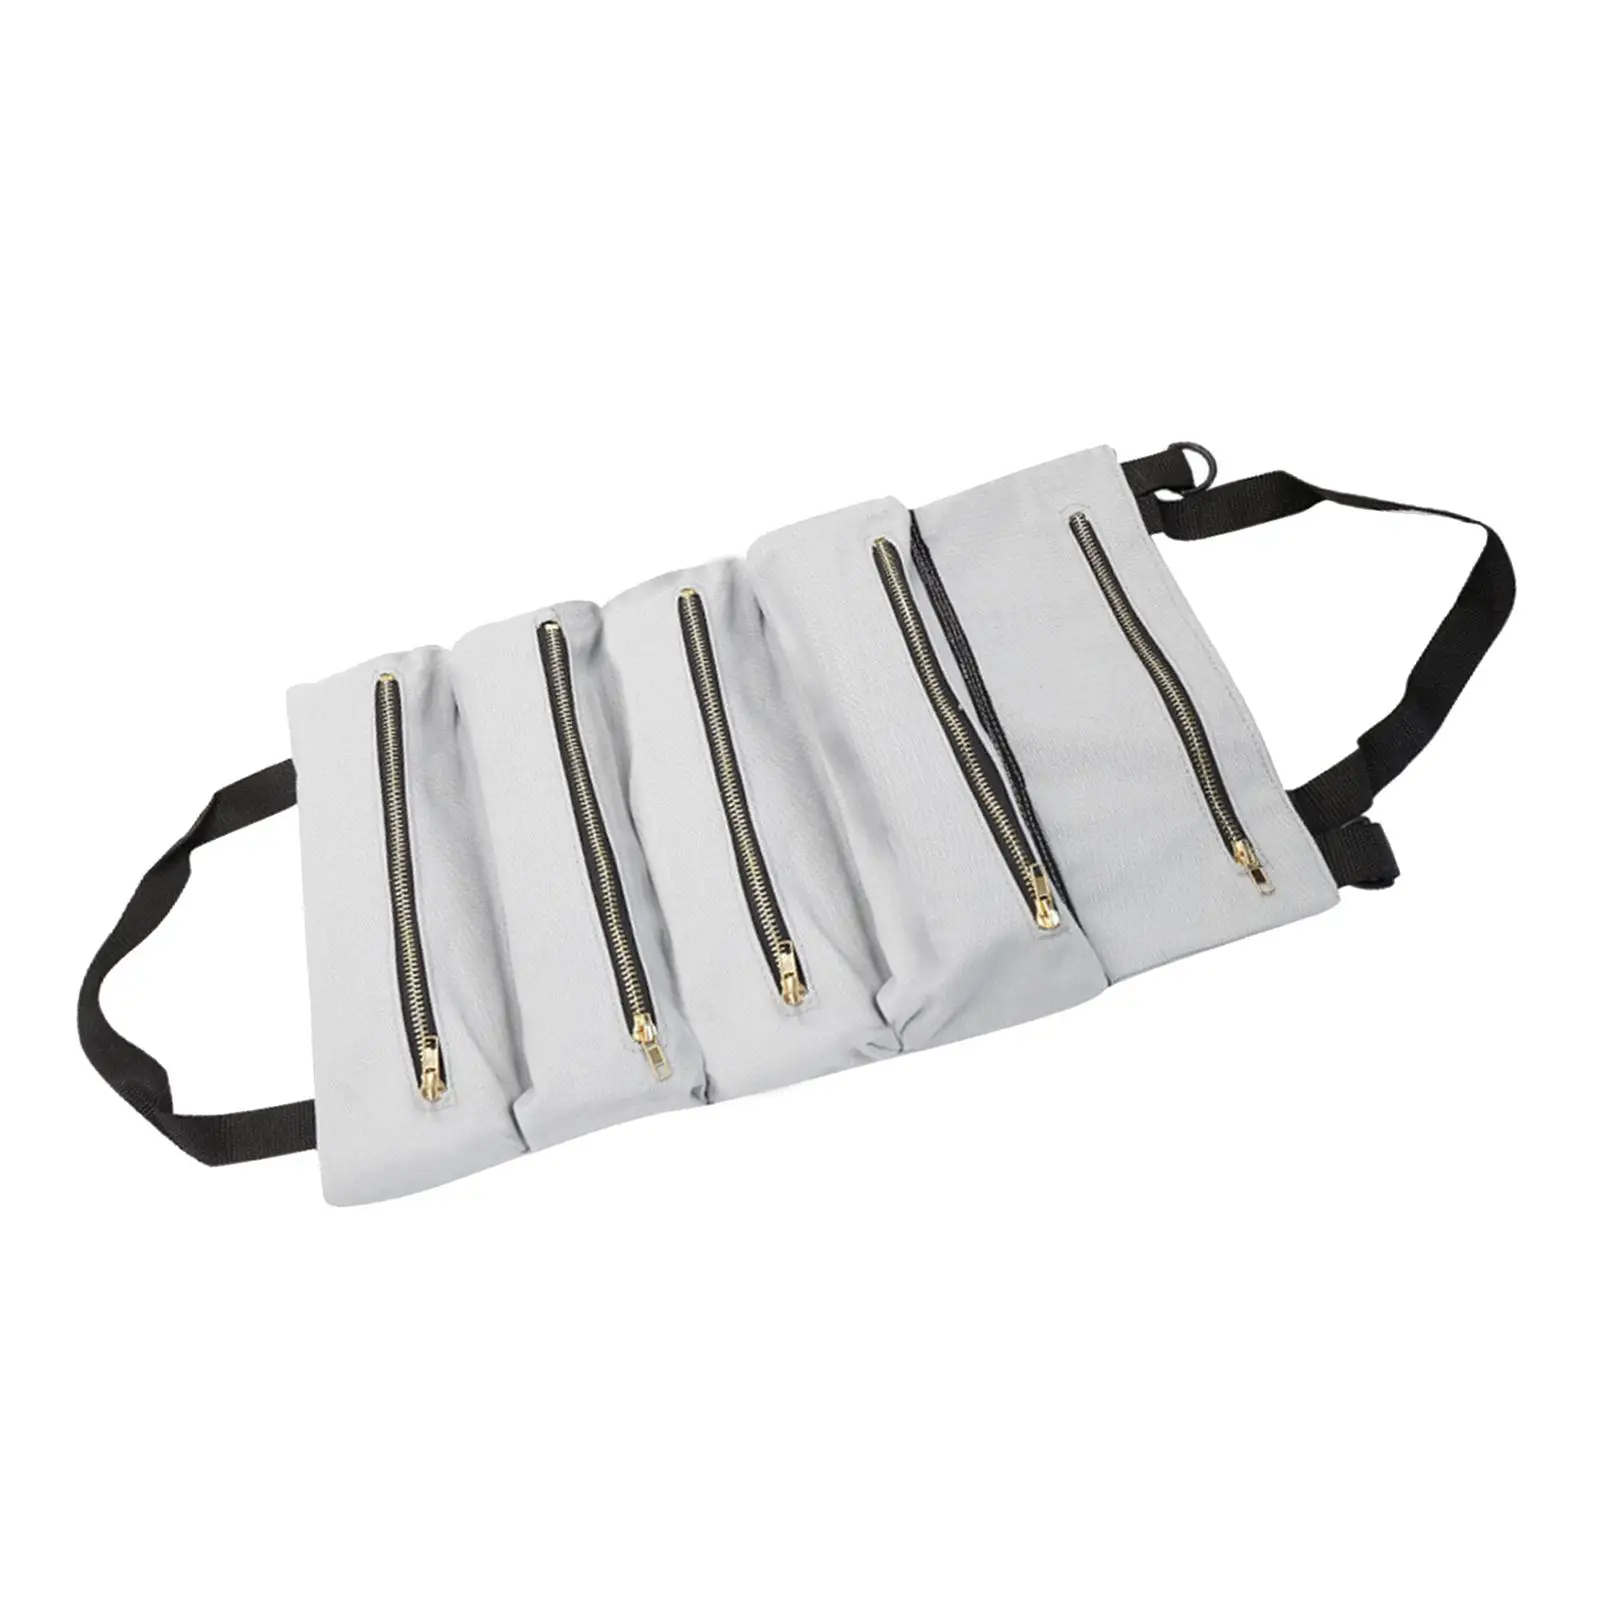 Roll up Tool Bag Zipper Carrier Tote Collapsible Canvas Wrench Tools Pouch Small Tool Bag for Carpenter Plumber Electrician